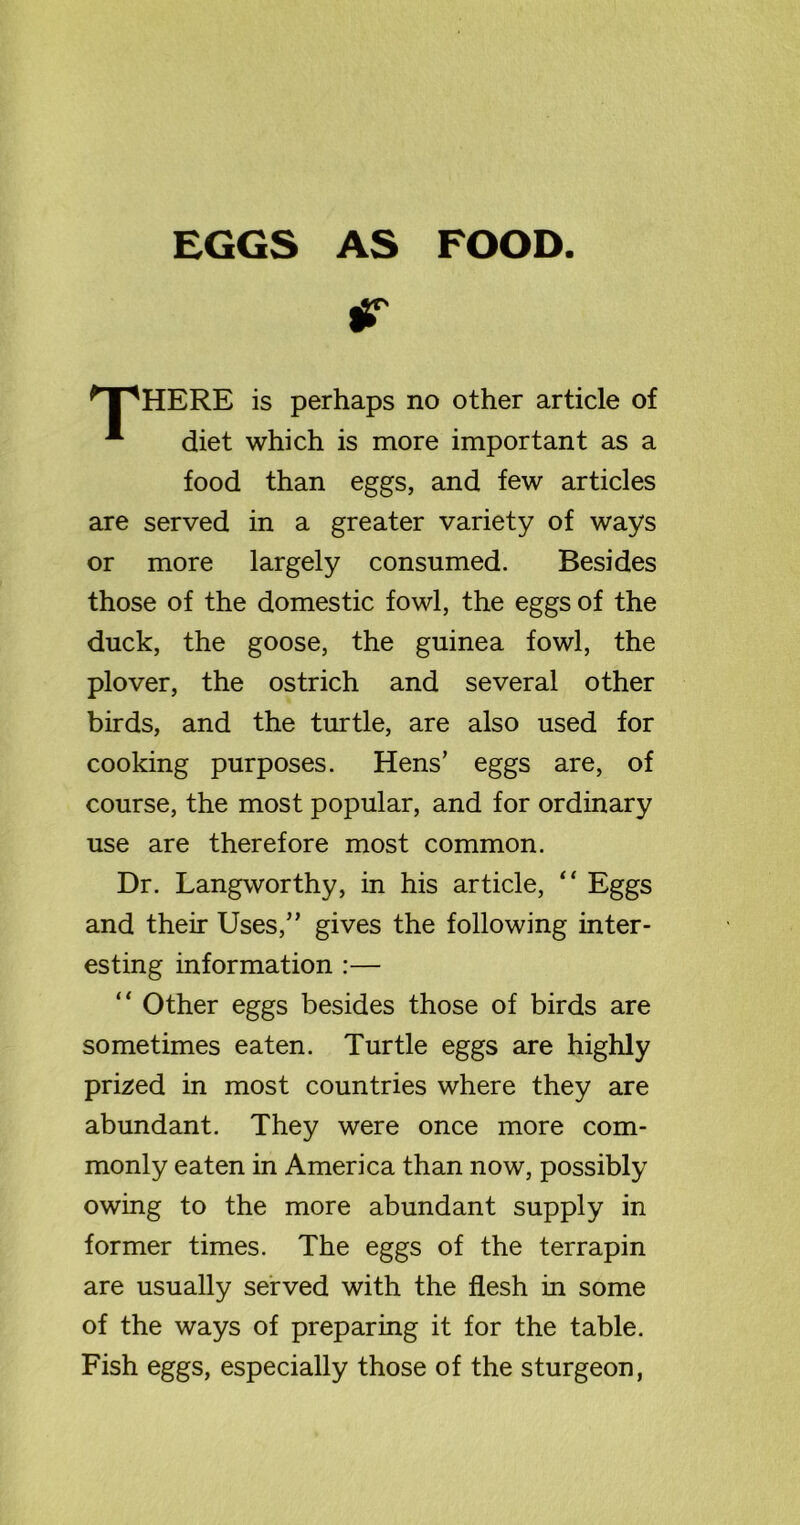 EGGS AS FOOD. * I 'HERE is perhaps no other article of -*■ diet which is more important as a food than eggs, and few articles are served in a greater variety of ways or more largely consumed. Besides those of the domestic fowl, the eggs of the duck, the goose, the guinea fowl, the plover, the ostrich and several other birds, and the turtle, are also used for cooking purposes. Hens’ eggs are, of course, the most popular, and for ordinary use are therefore most common. Dr. Langworthy, in his article, “ Eggs and their Uses,” gives the following inter- esting information :— “ Other eggs besides those of birds are sometimes eaten. Turtle eggs are highly prized in most countries where they are abundant. They were once more com- monly eaten in America than now, possibly owing to the more abundant supply in former times. The eggs of the terrapin are usually served with the flesh in some of the ways of preparing it for the table. Fish eggs, especially those of the sturgeon,